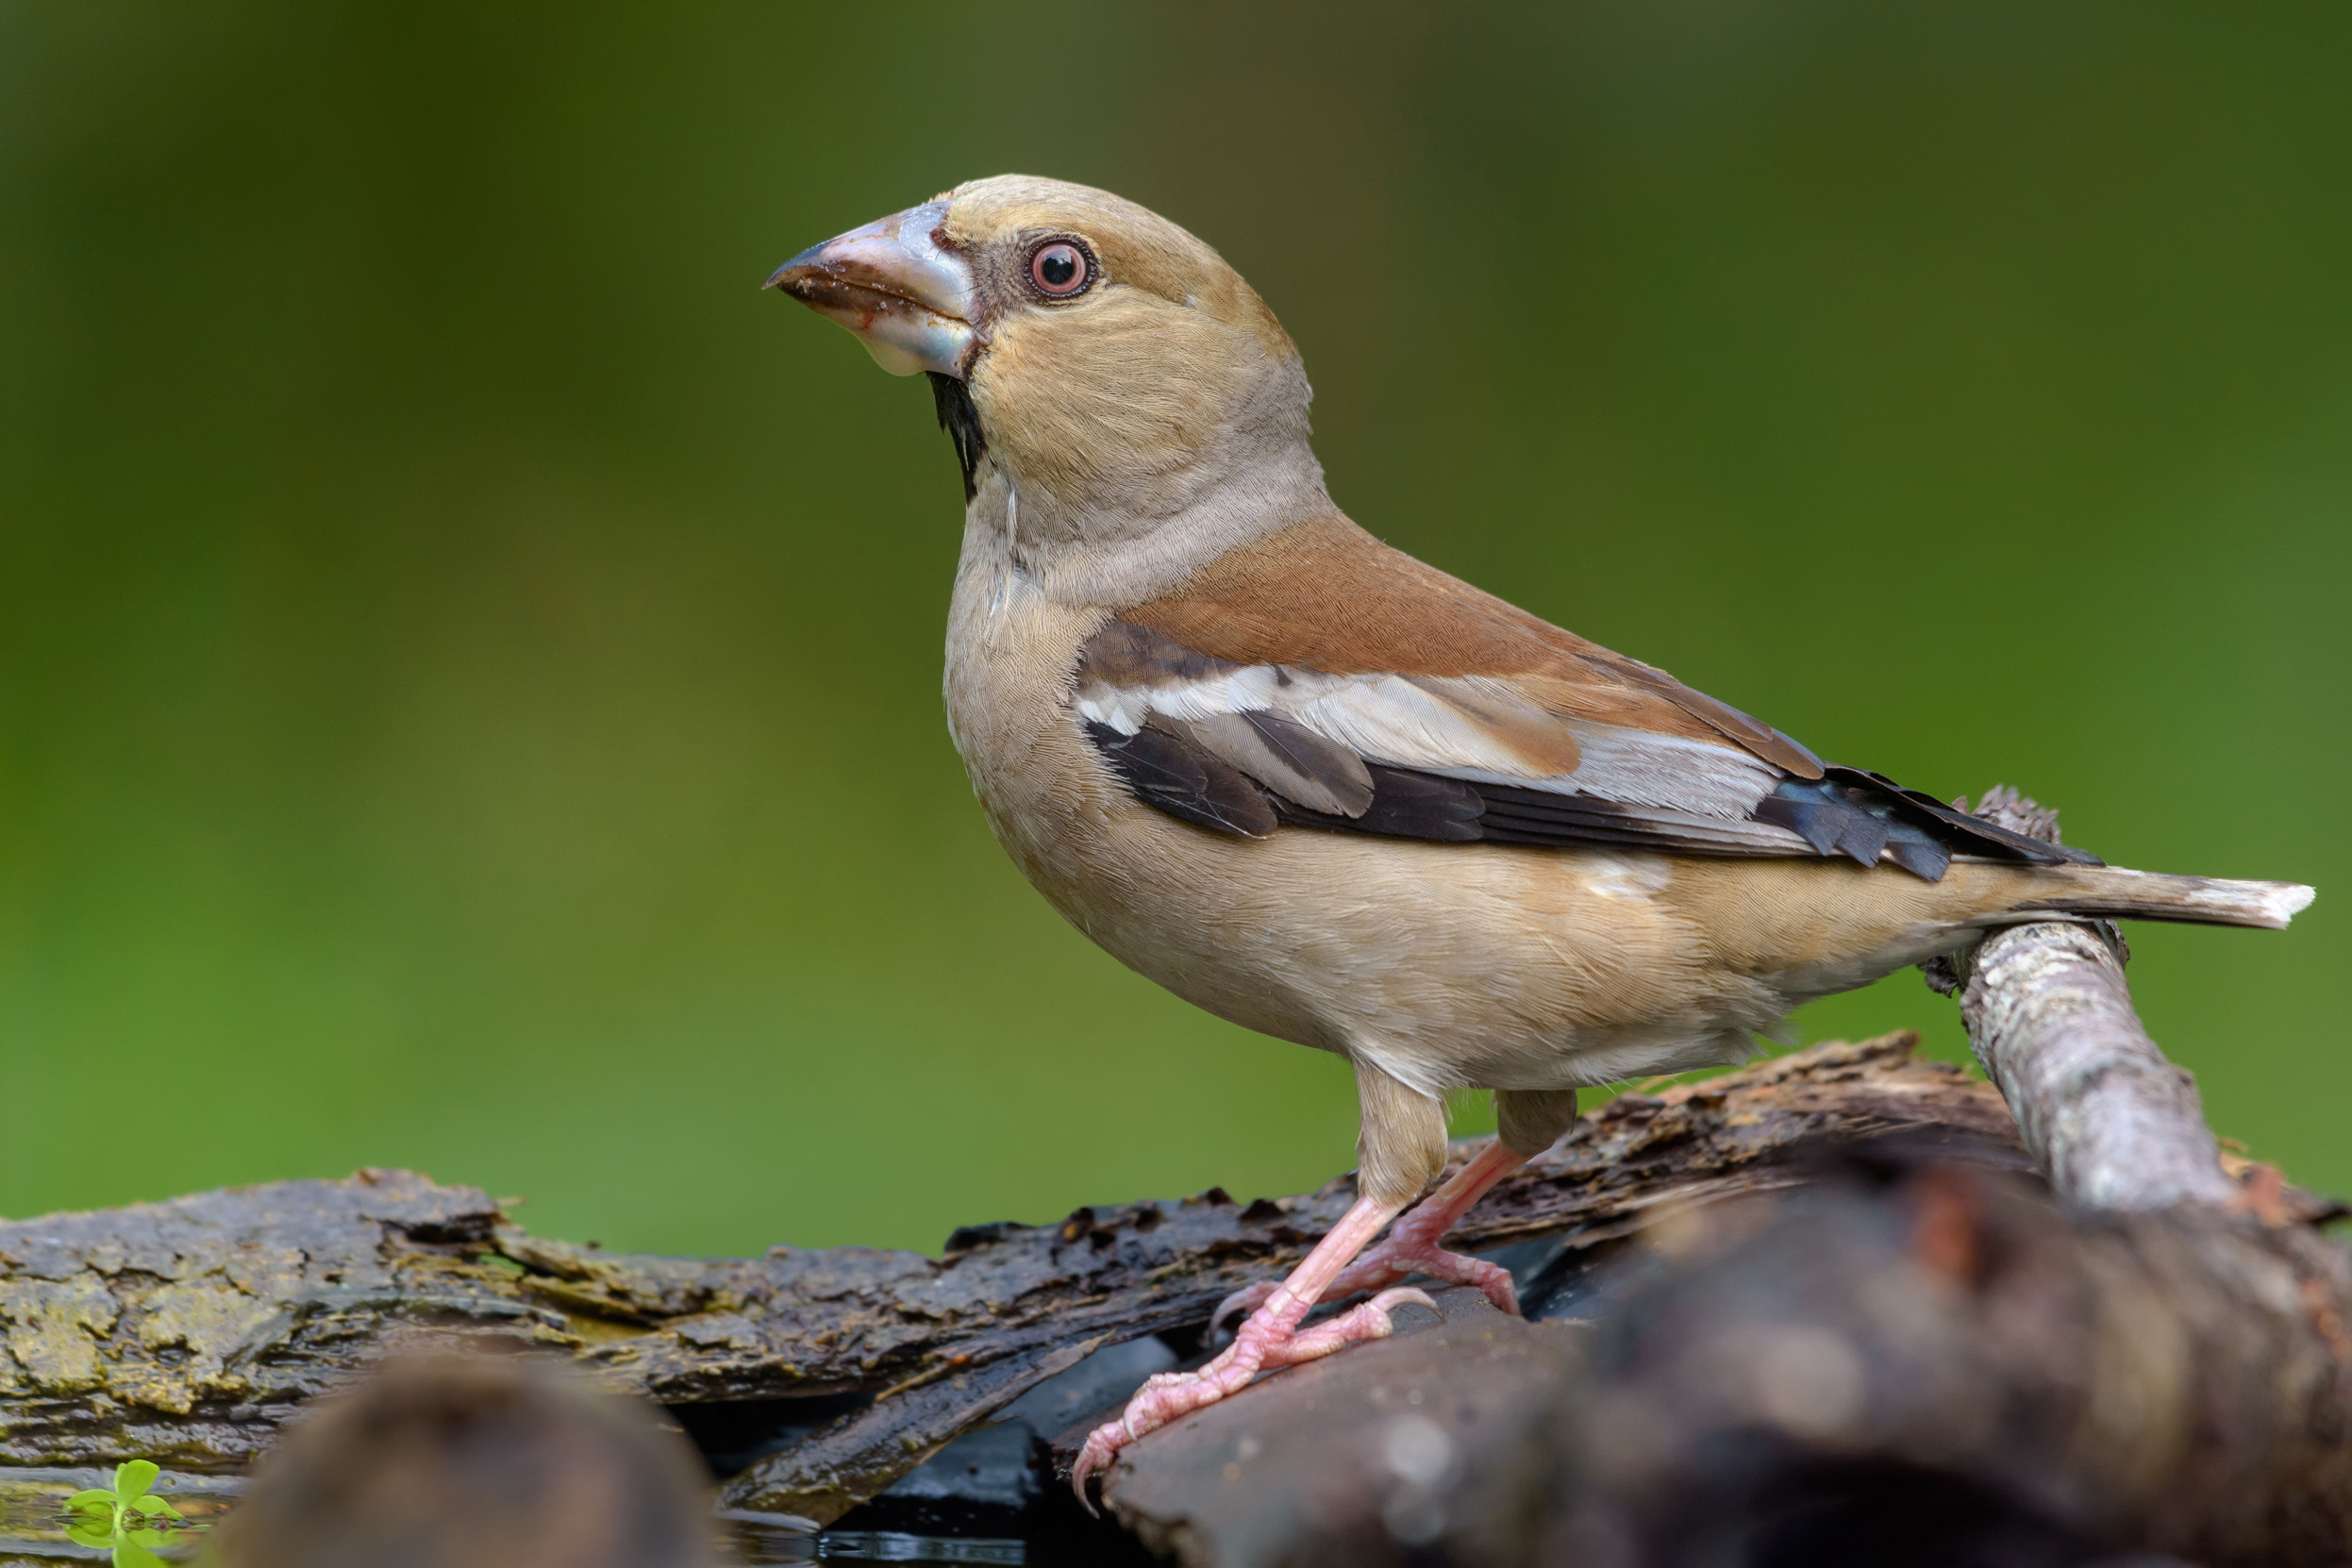 A lone female Hawfinch stood on stones.